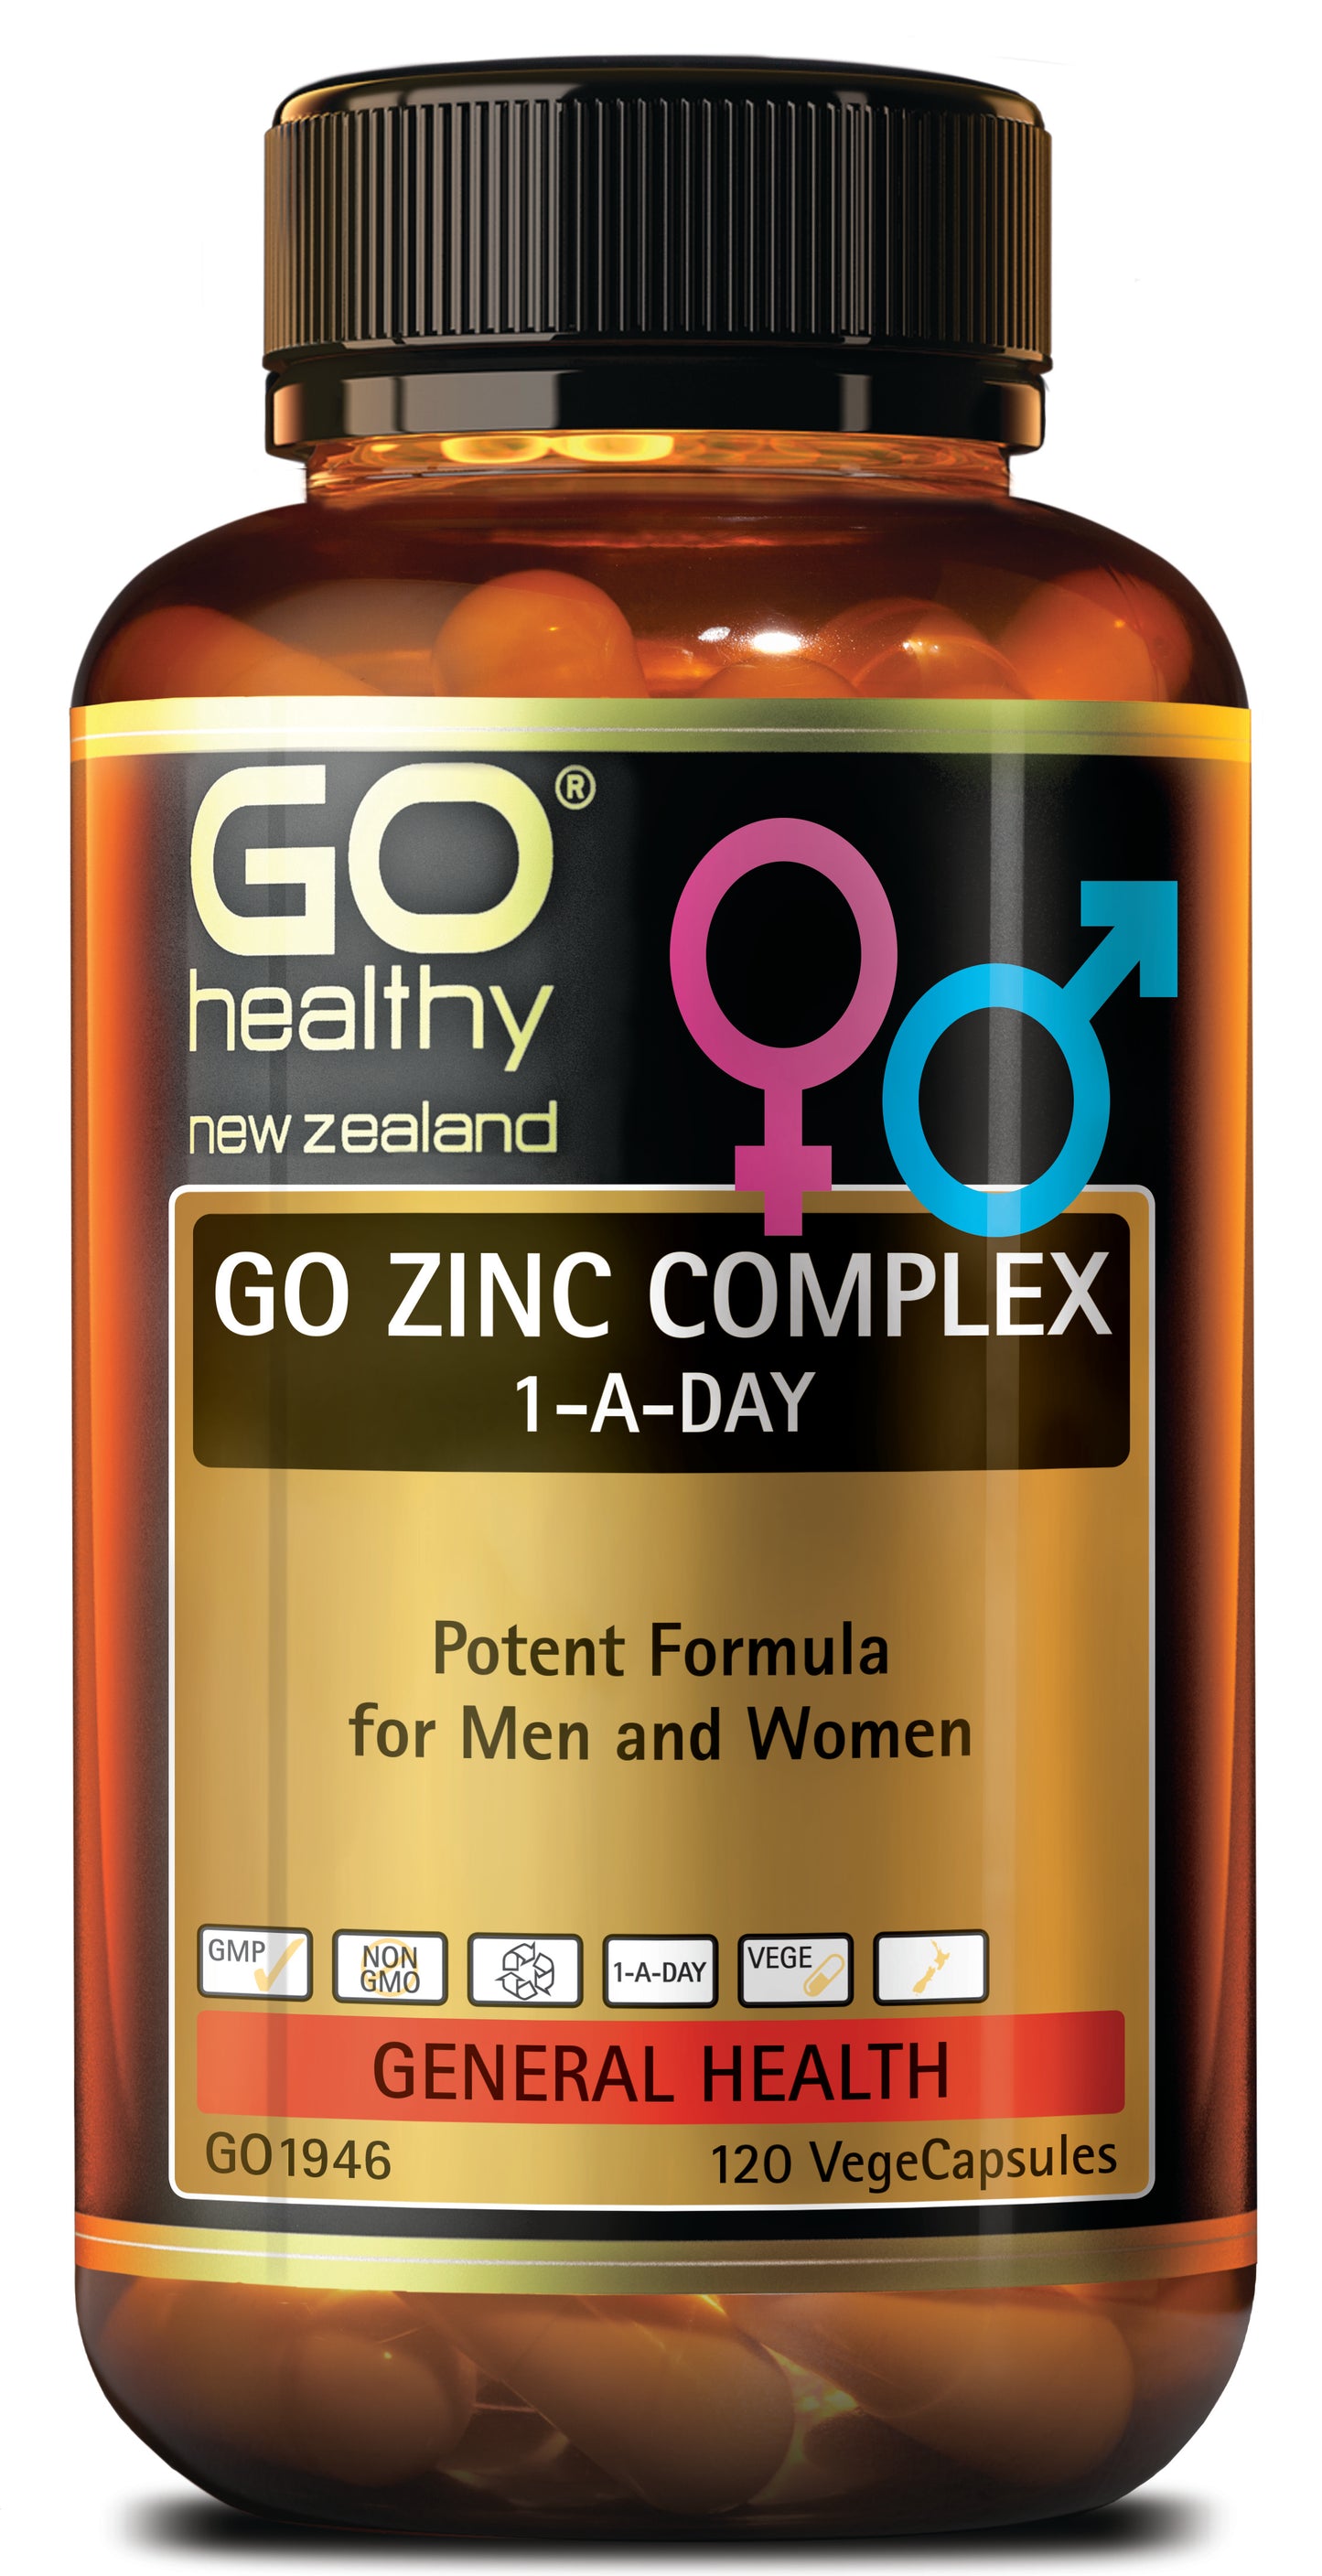 Go Healthy Go Zinc Complex 1-A-Day 120 capsules